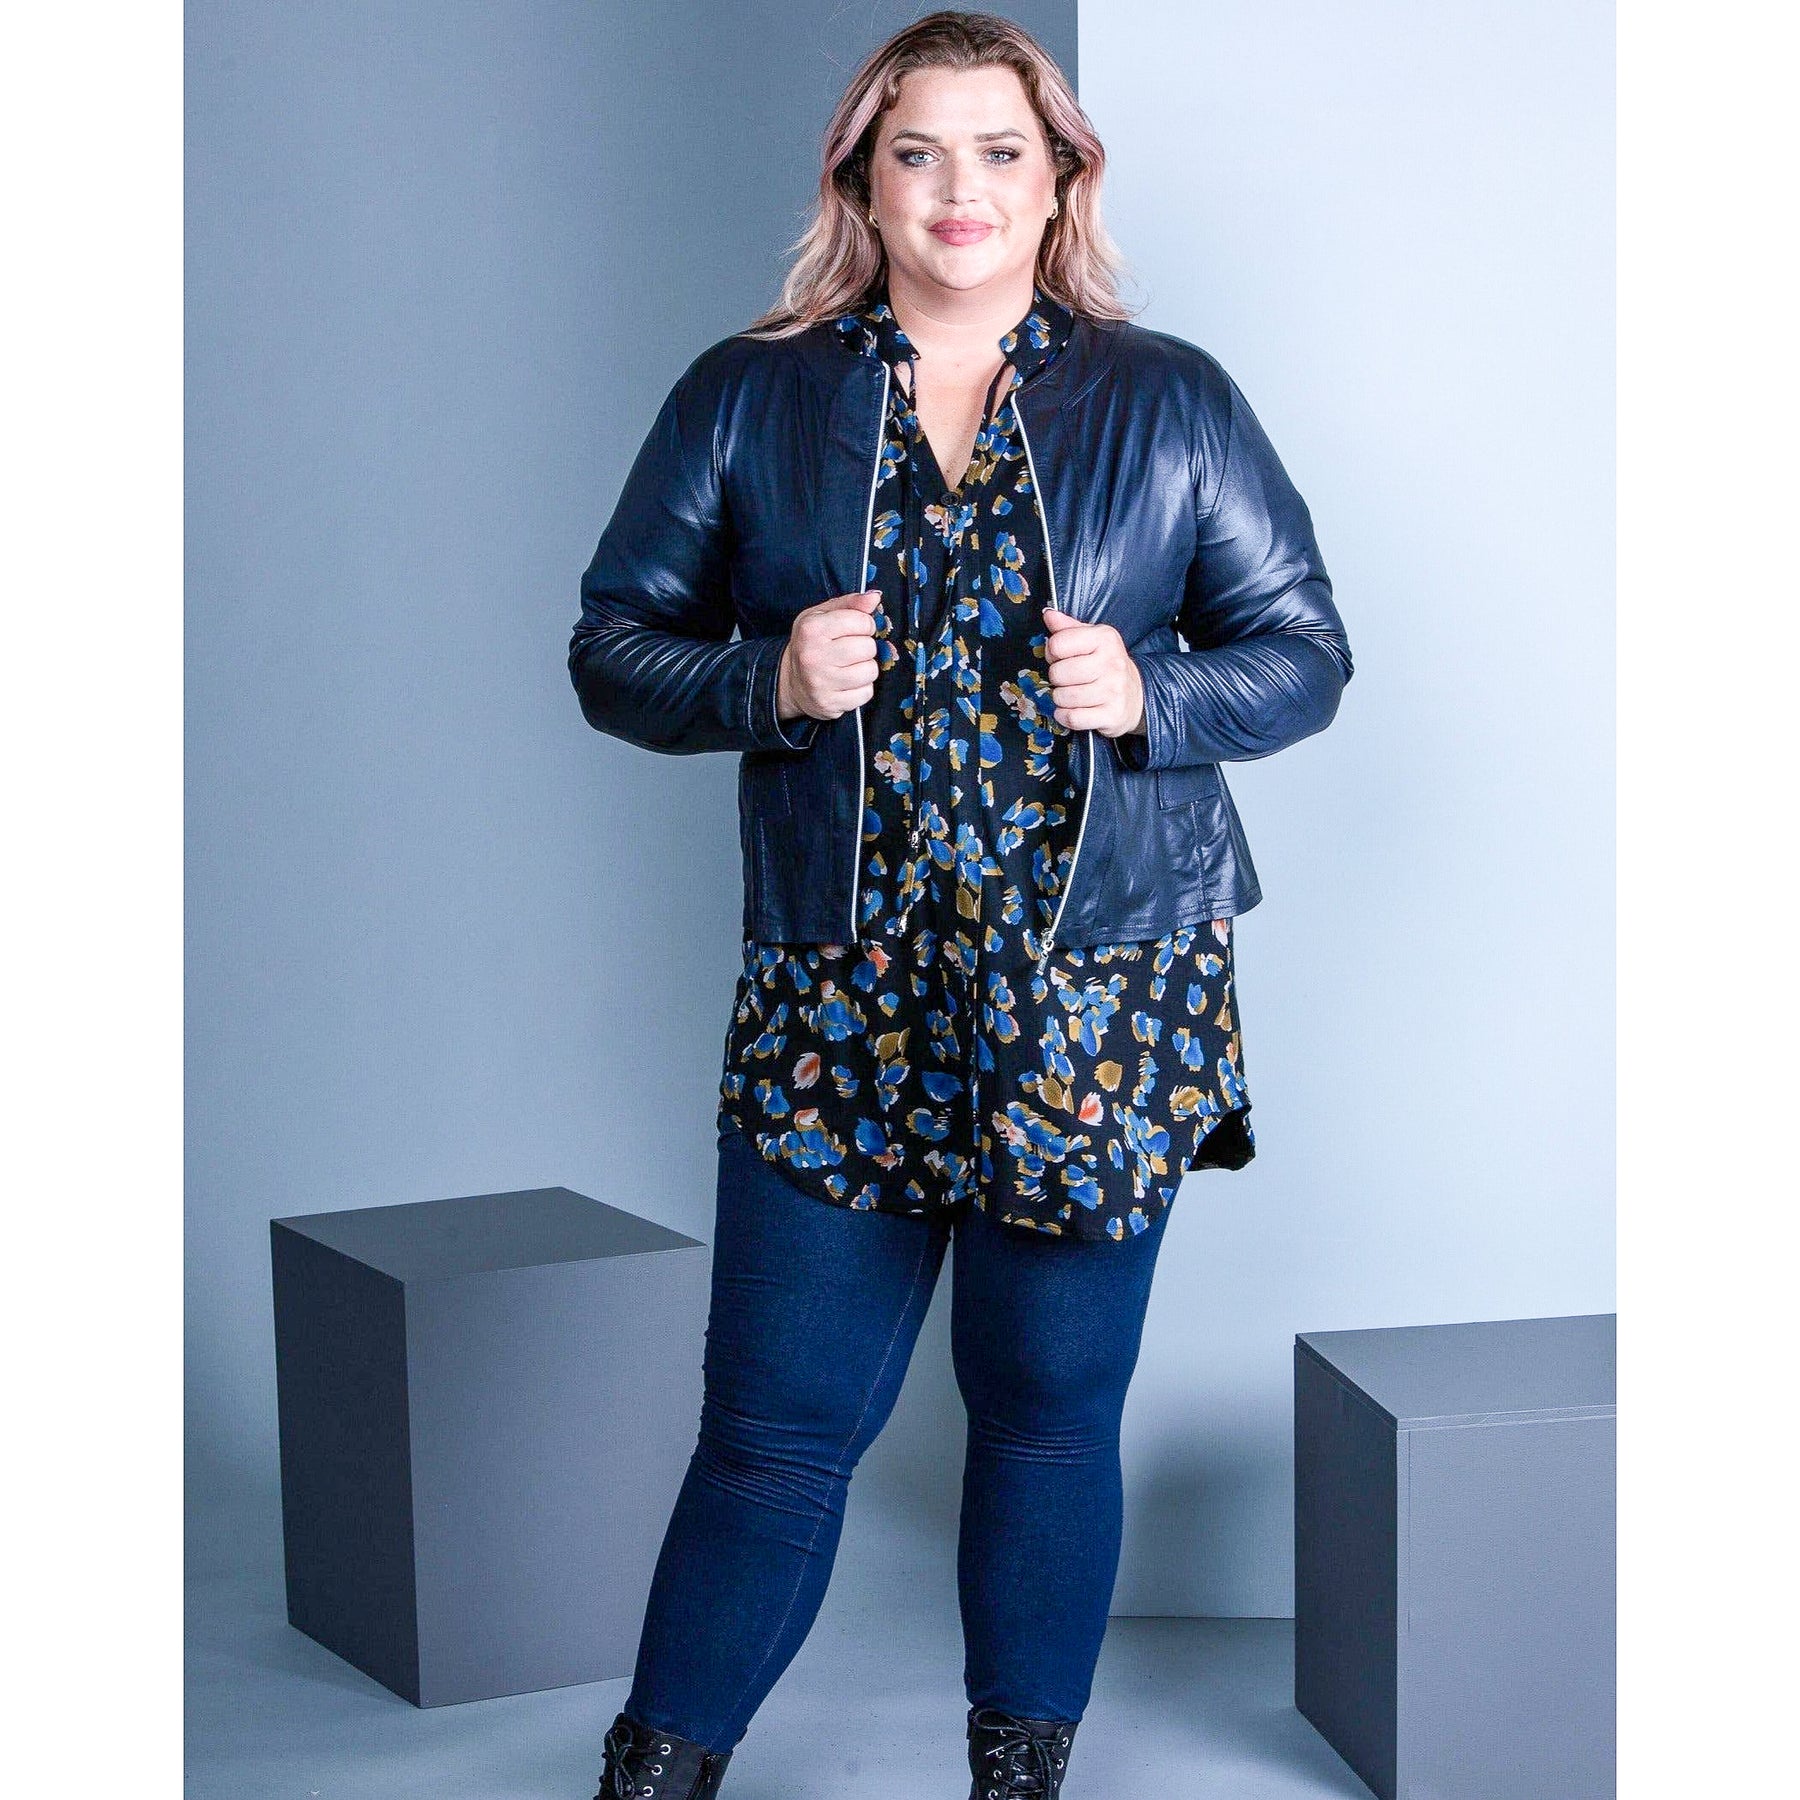 Magna Jacket in Navy, Plus Size Clothing